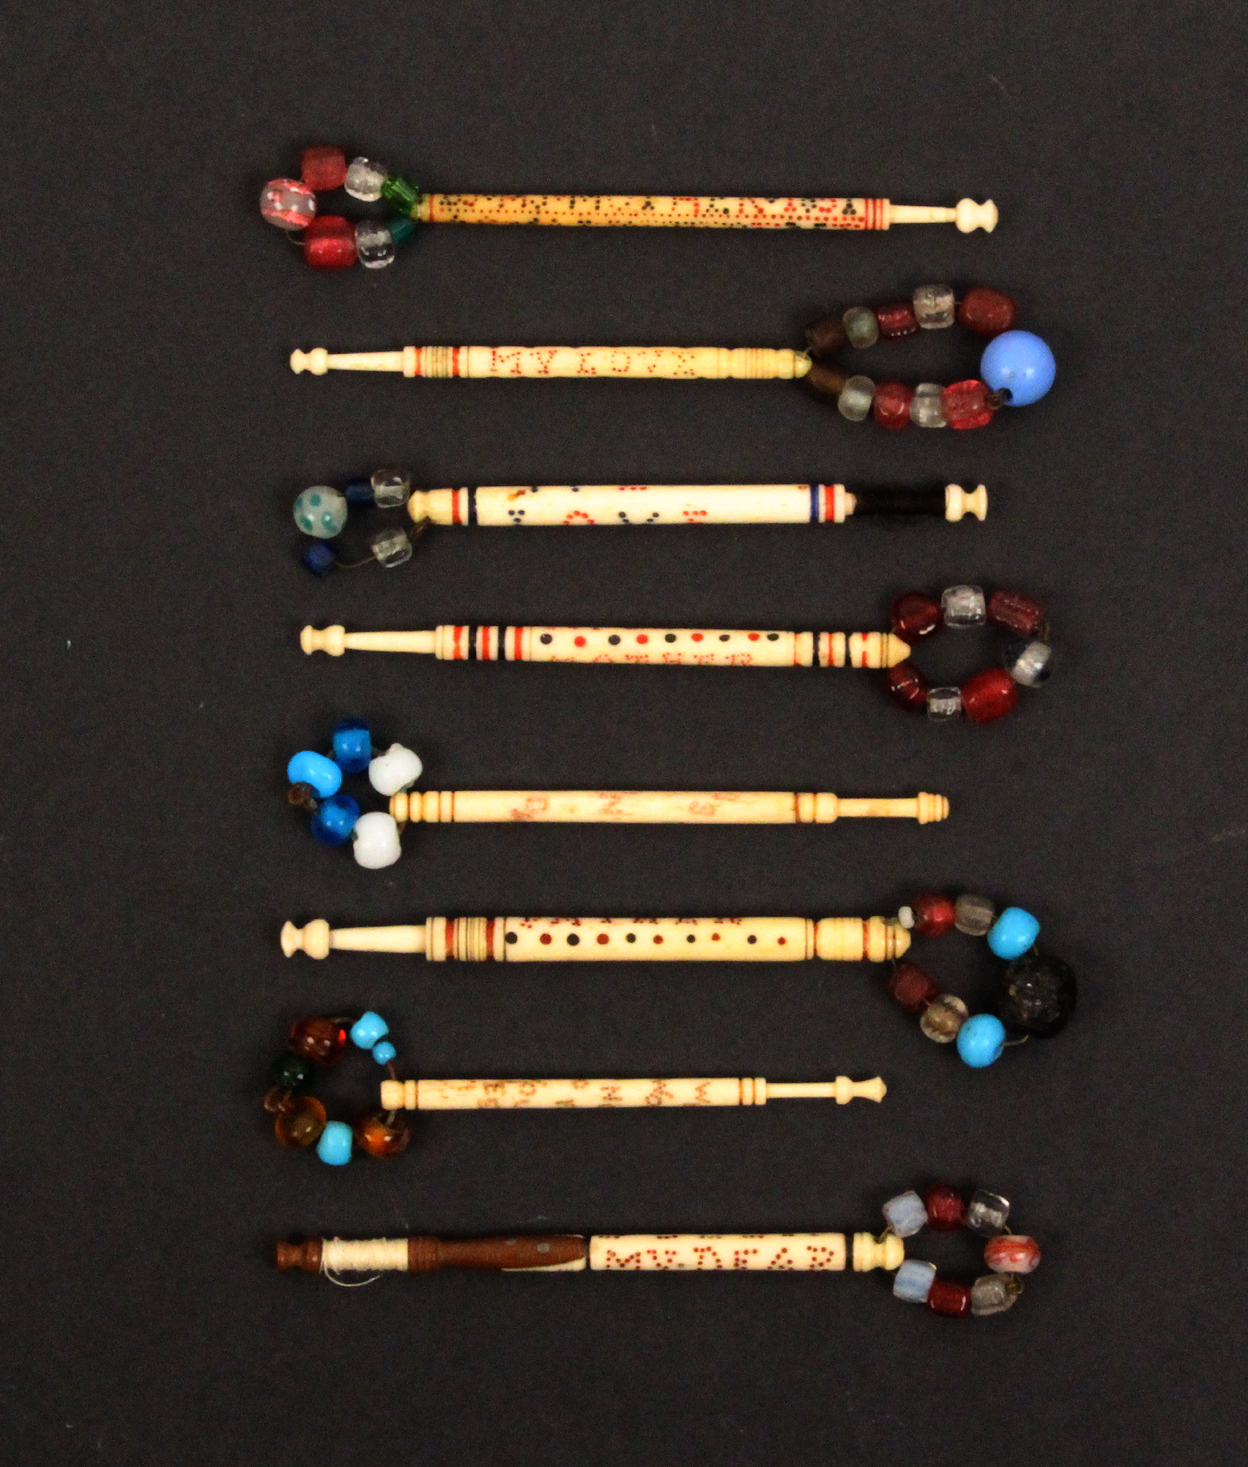 Eight spot inscribed bone lace bobbins comprising - Love Me/My Love - Love Me/My Dear Mother/My Dear